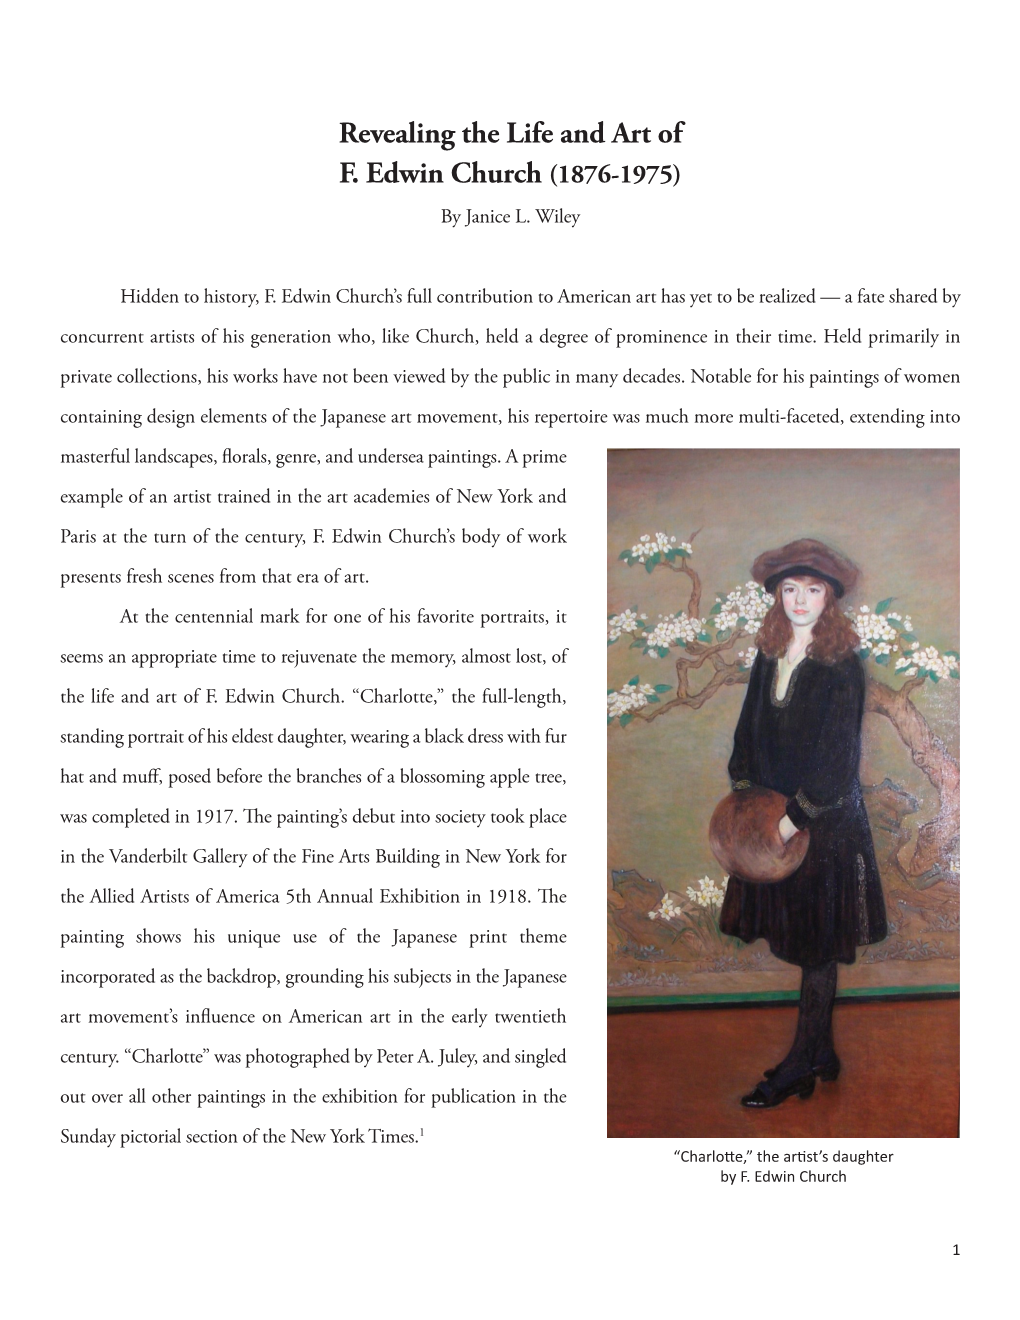 Revealing the Life and Art of F. Edwin Church (1876-1975) by Janice L